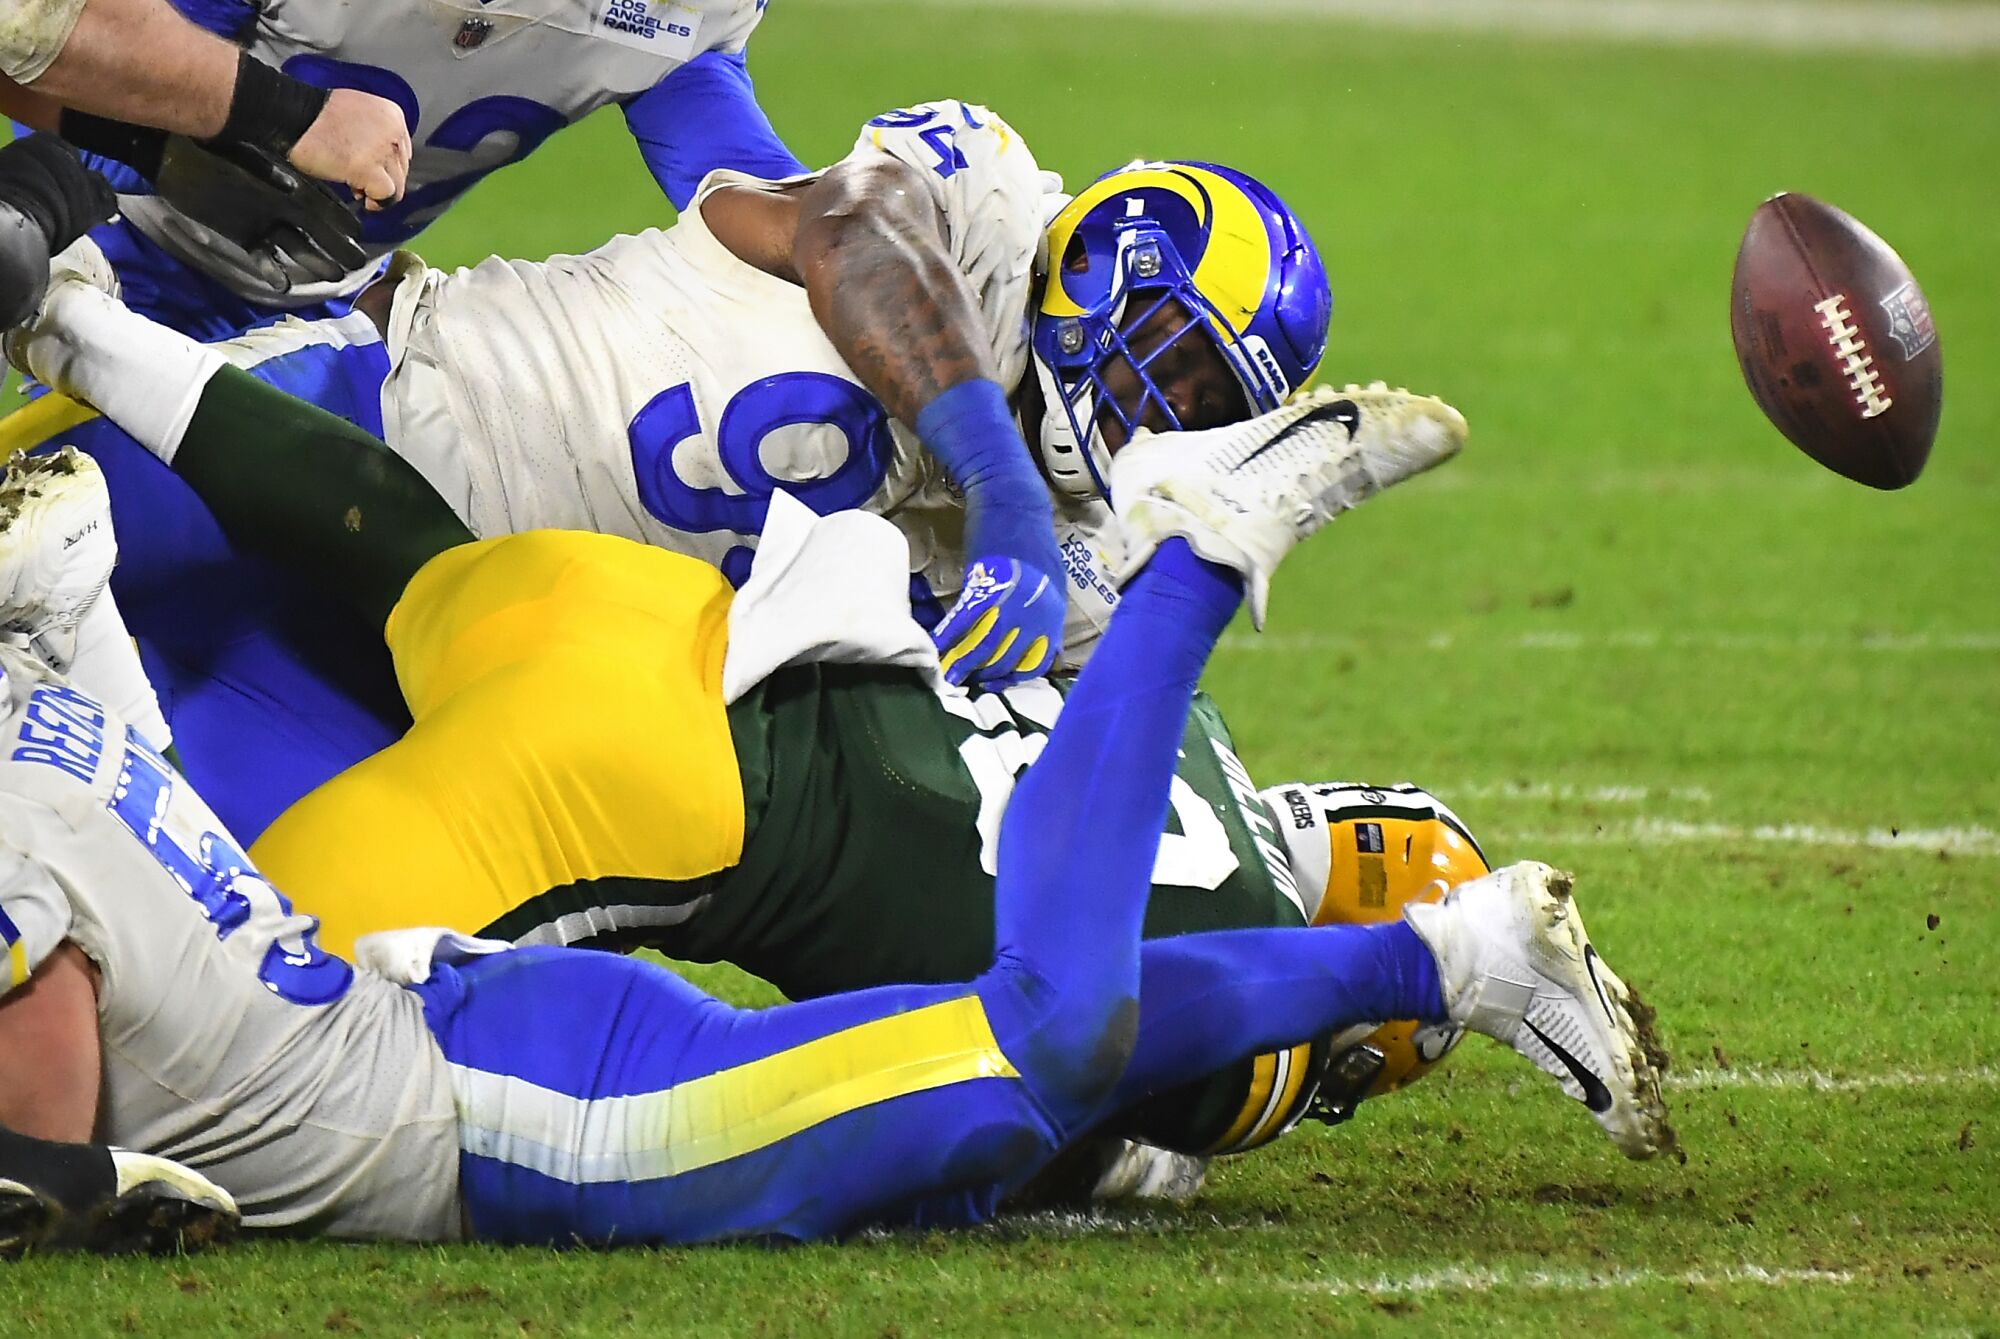 Green Bay Packers running back AJ Dillon fumbles the ball as Rams defenders look on in the fourth quarter.